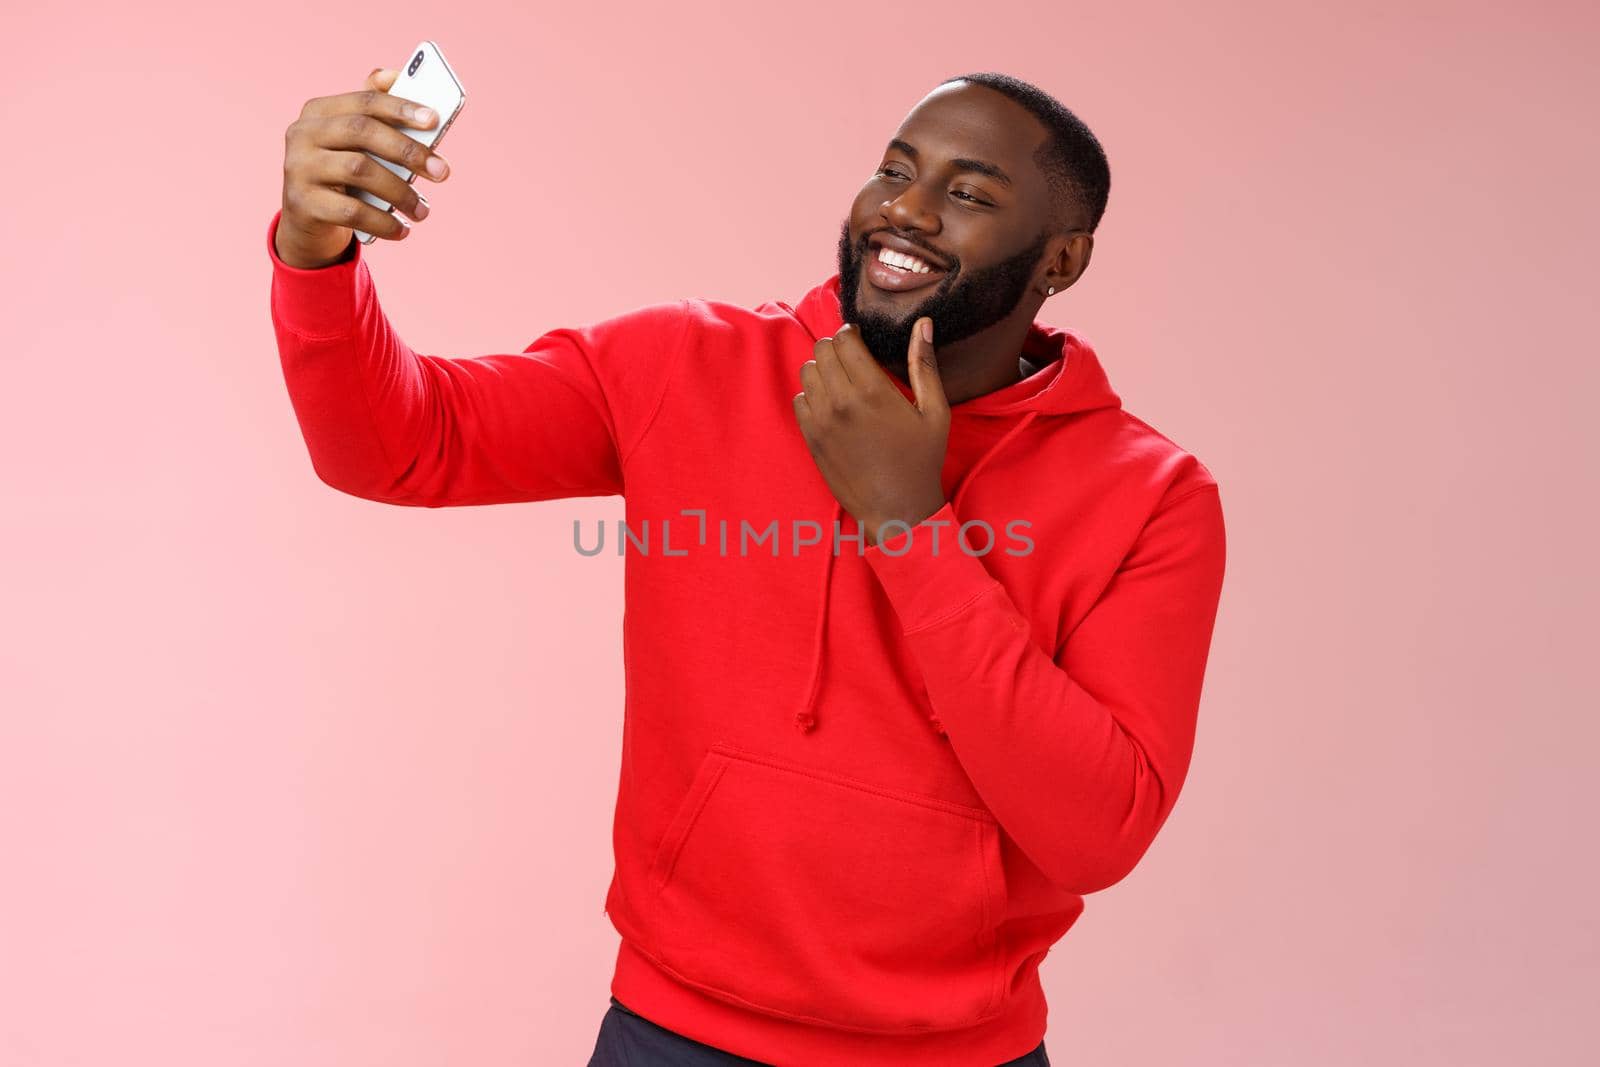 Cheeky cool african american confident bearded guy in red hoodie taking selfie update date app profile photo holding smartphone raised touching face sassy smiling look phone display flirty.